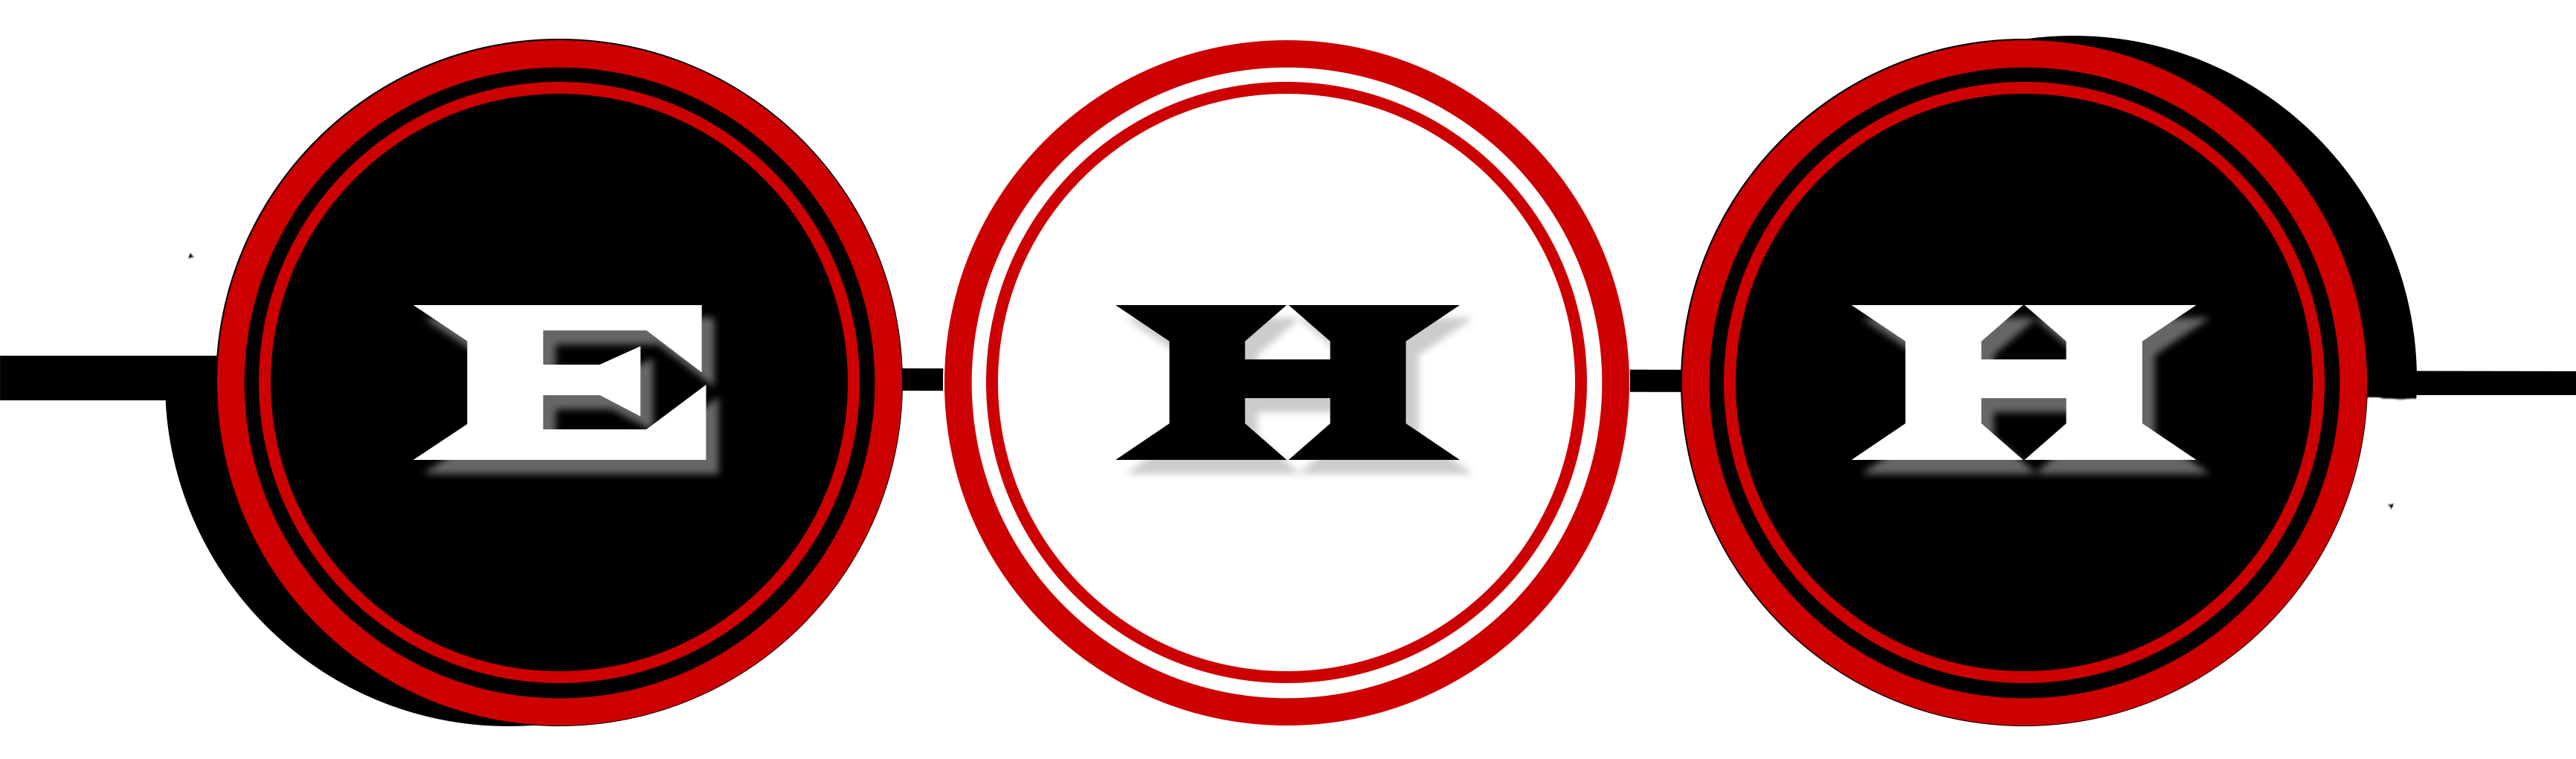 Environmental-Human-Harmony Ltd logo. Three circles in in a line with a Christmas hat on top of each one when each has inside it's centre letter E H H to the company name and two red circles decorating the large two black and middle white white circle.